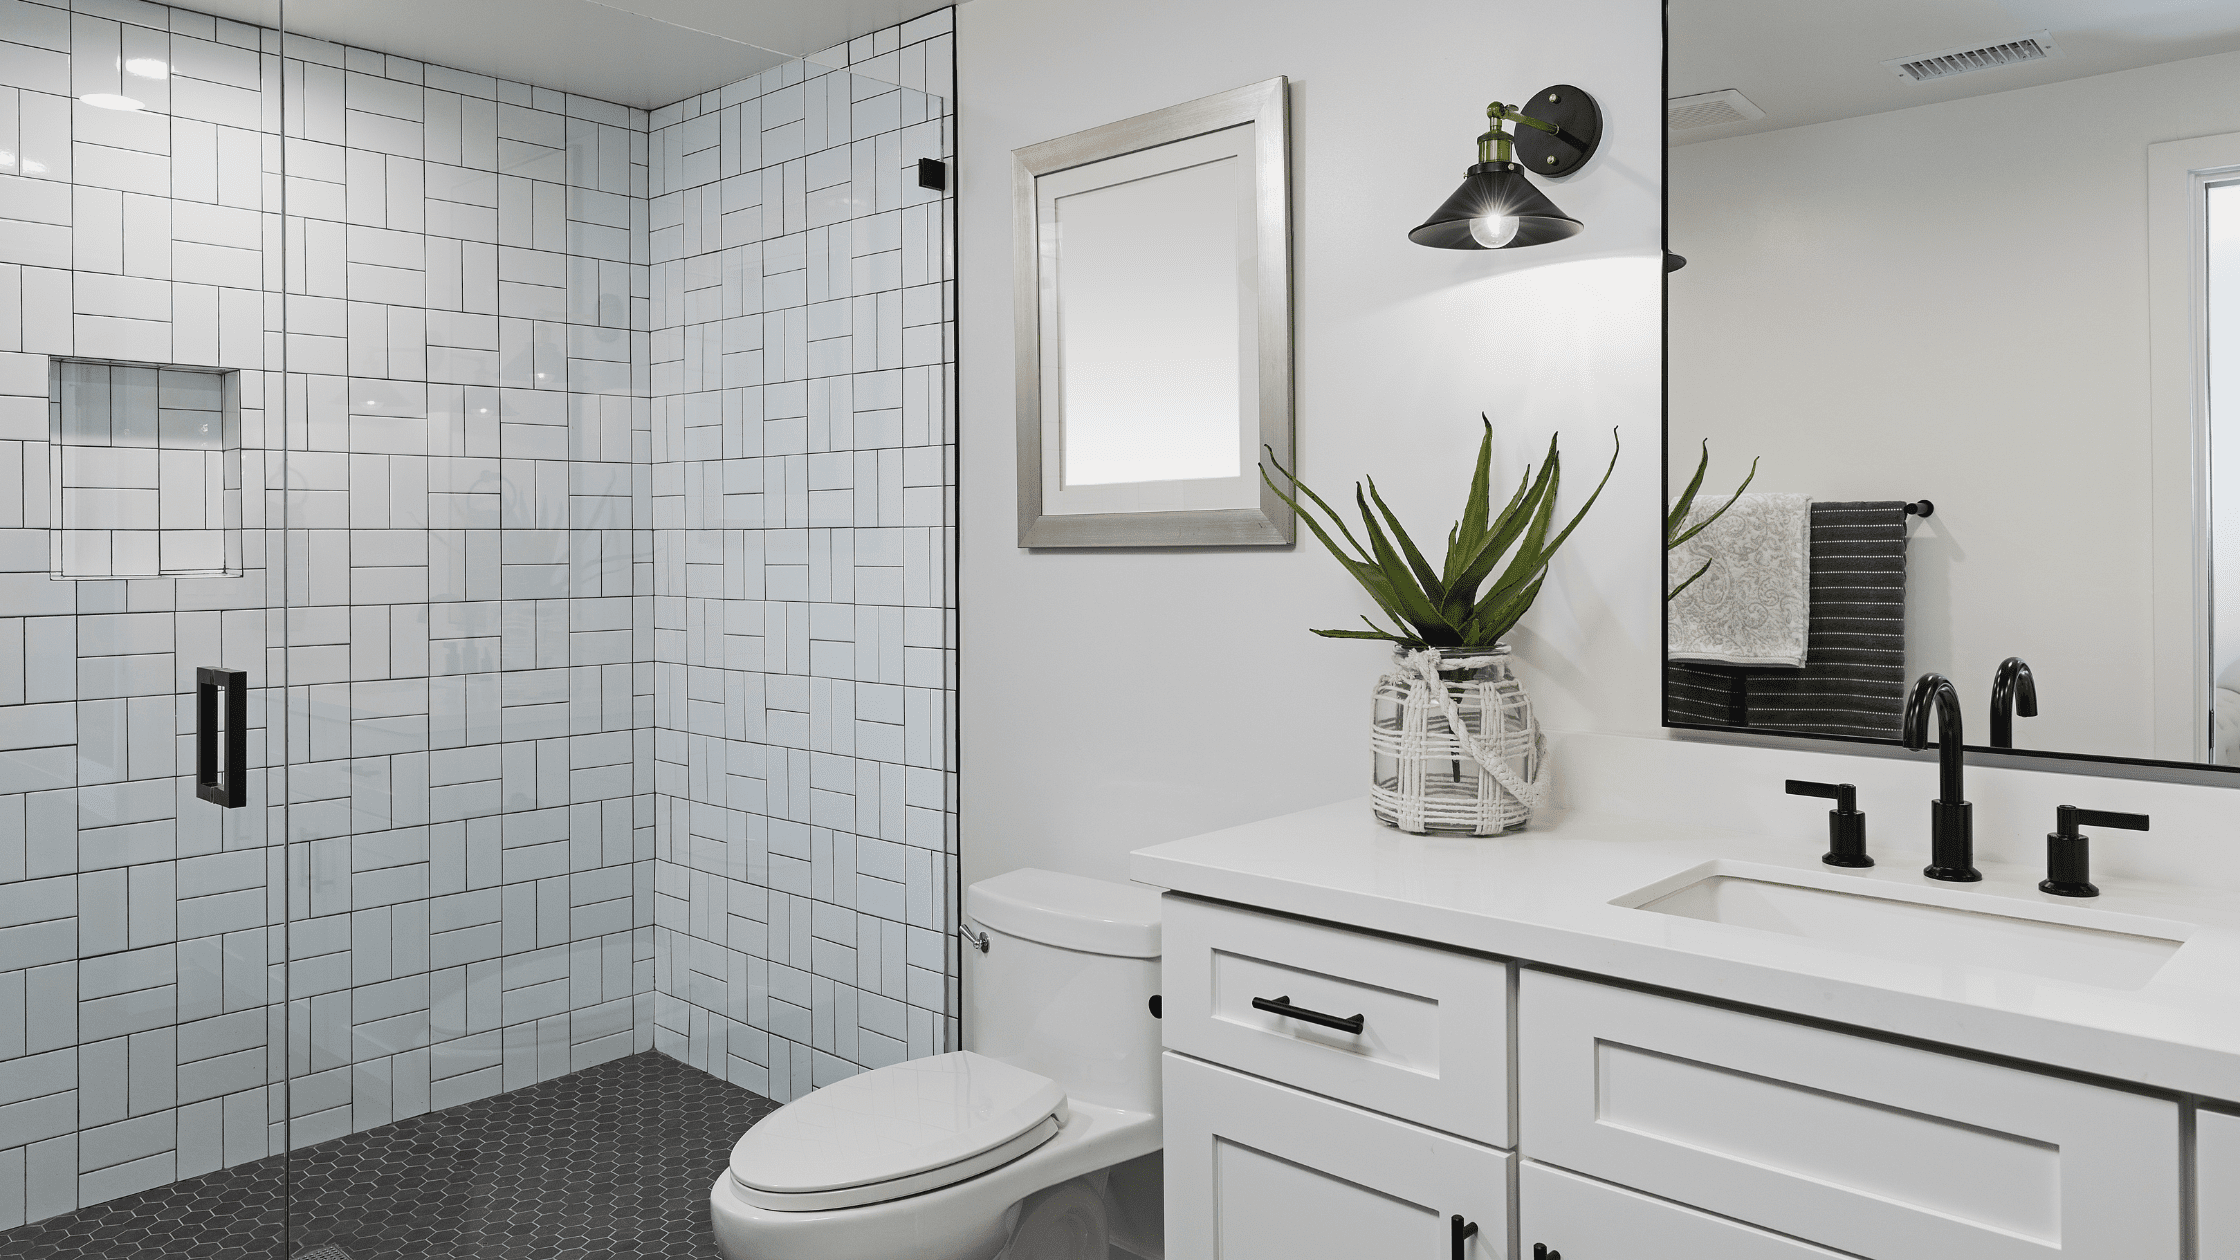 Get the bathroom of your dreams with our bathroom remodeling company in Springfield VA.